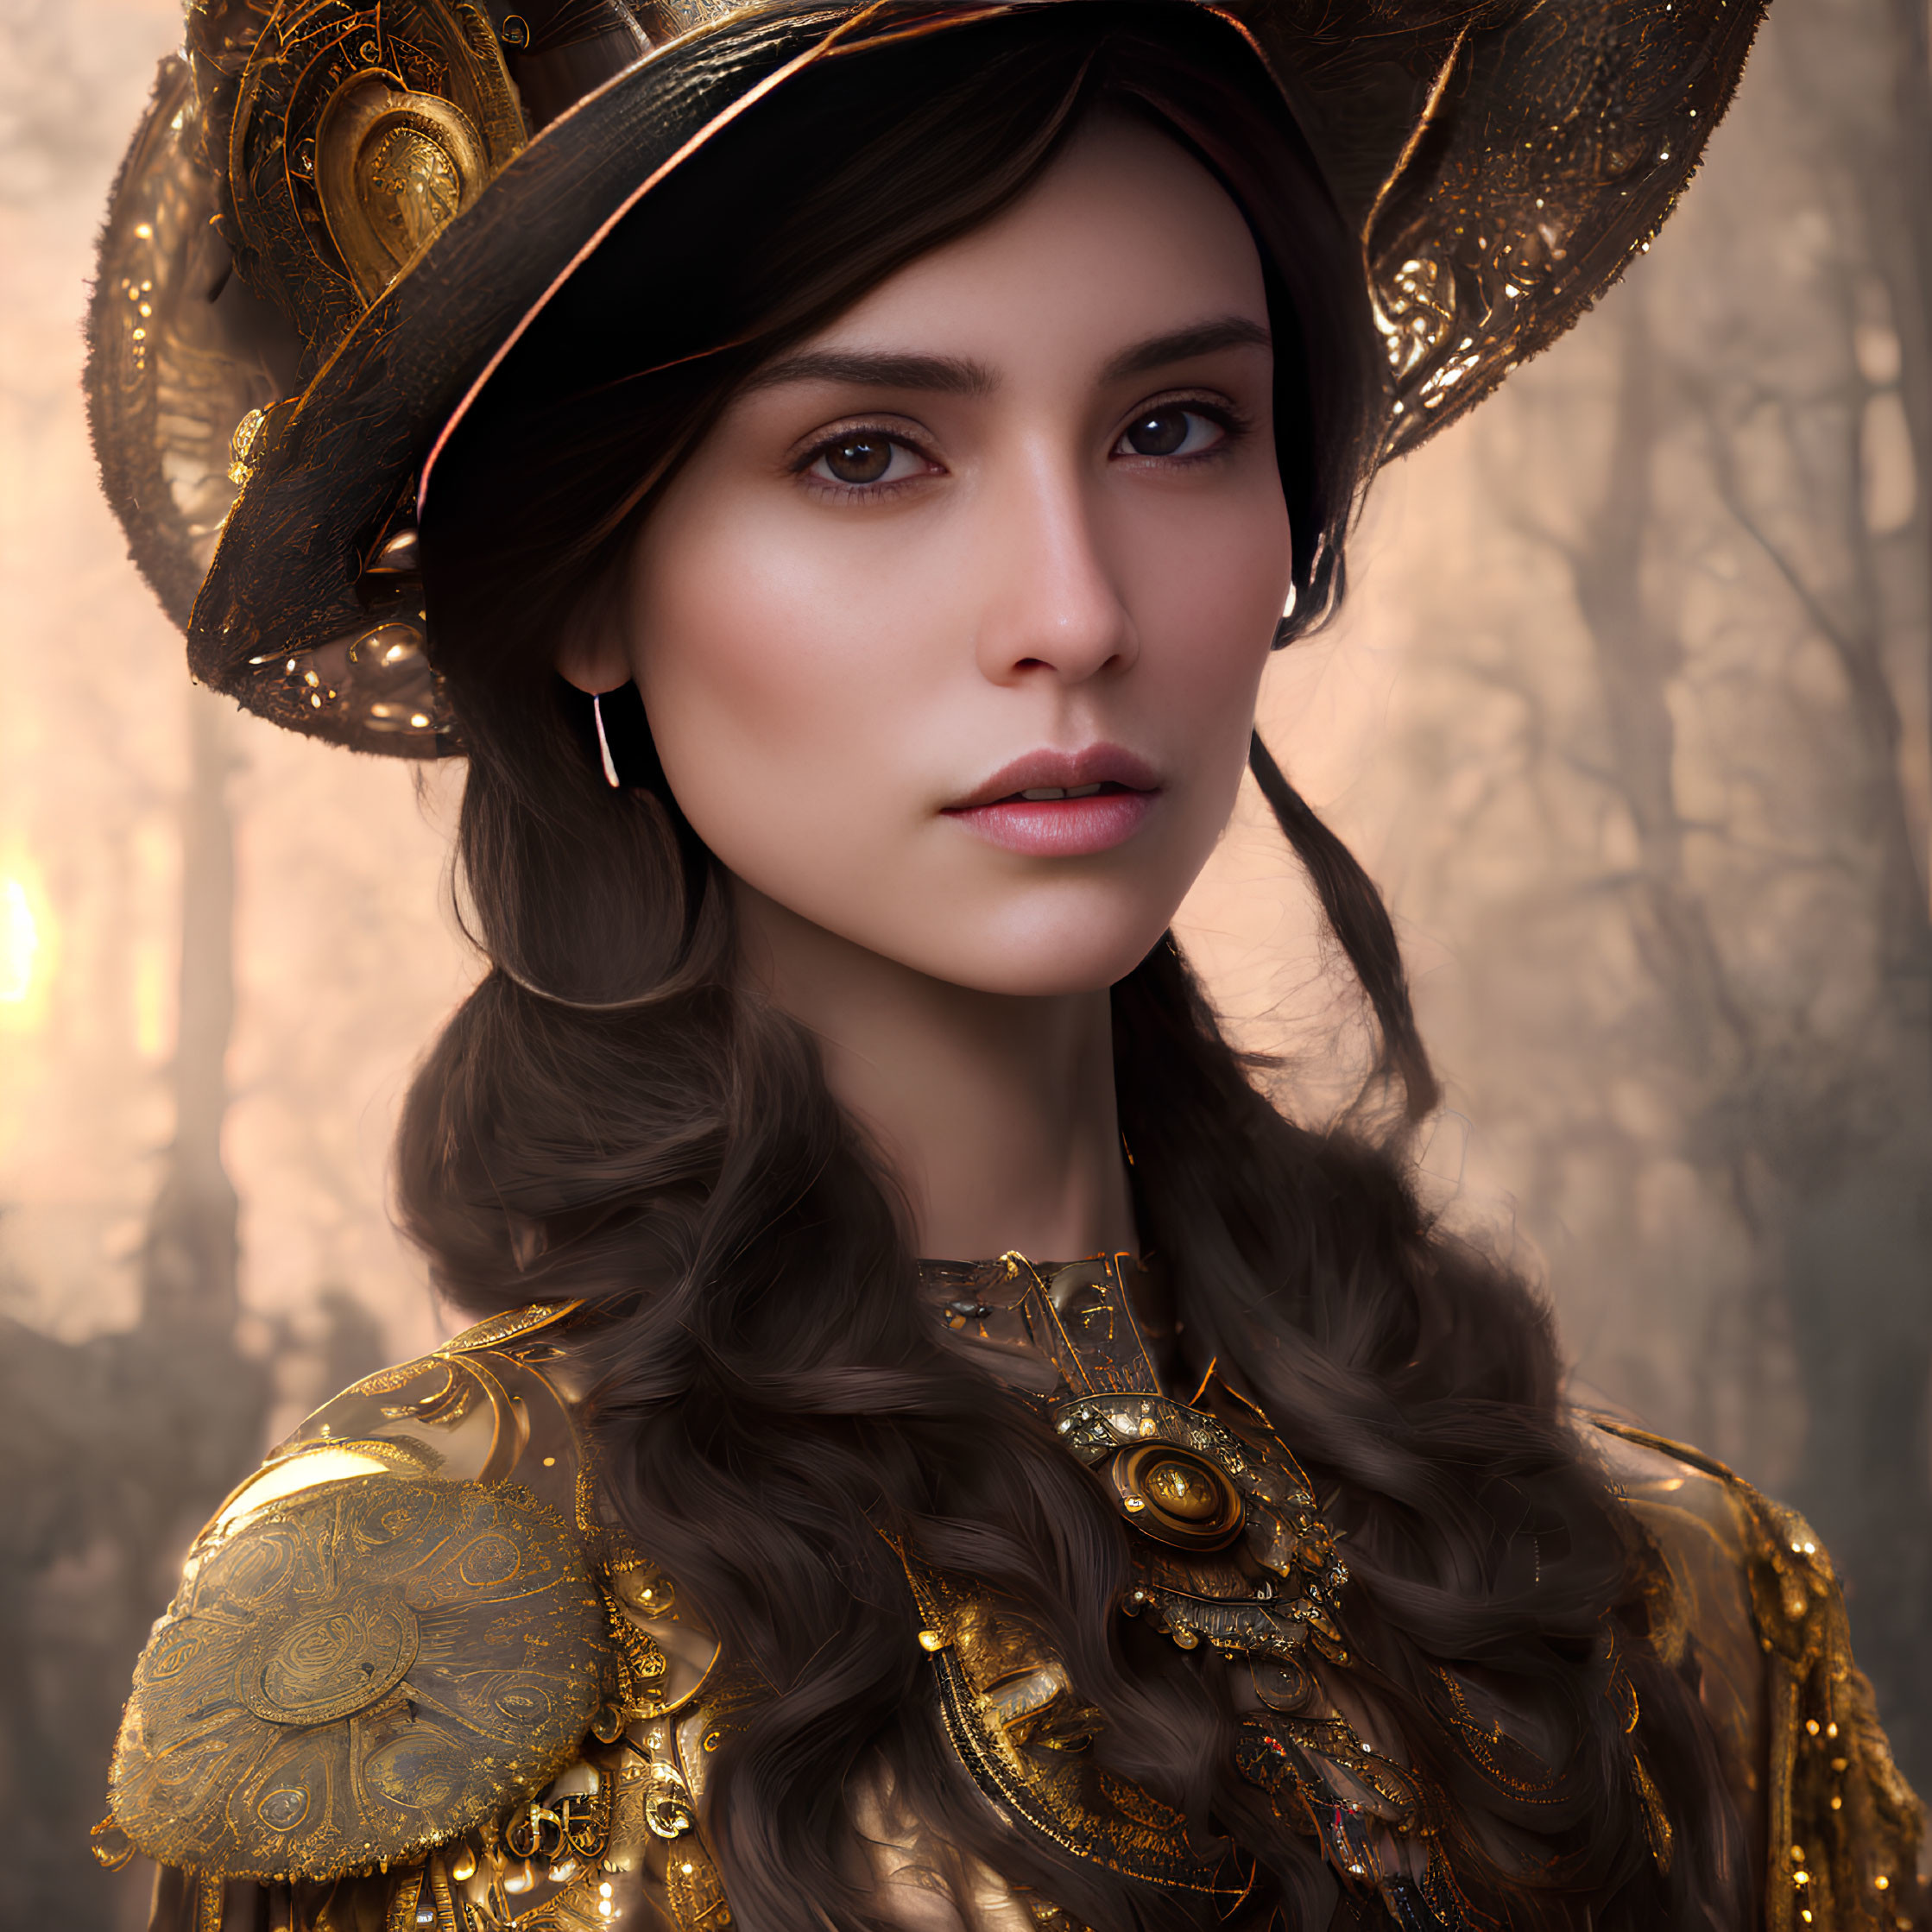 Woman in Golden Armor and Ornate Hat in Misty Forest